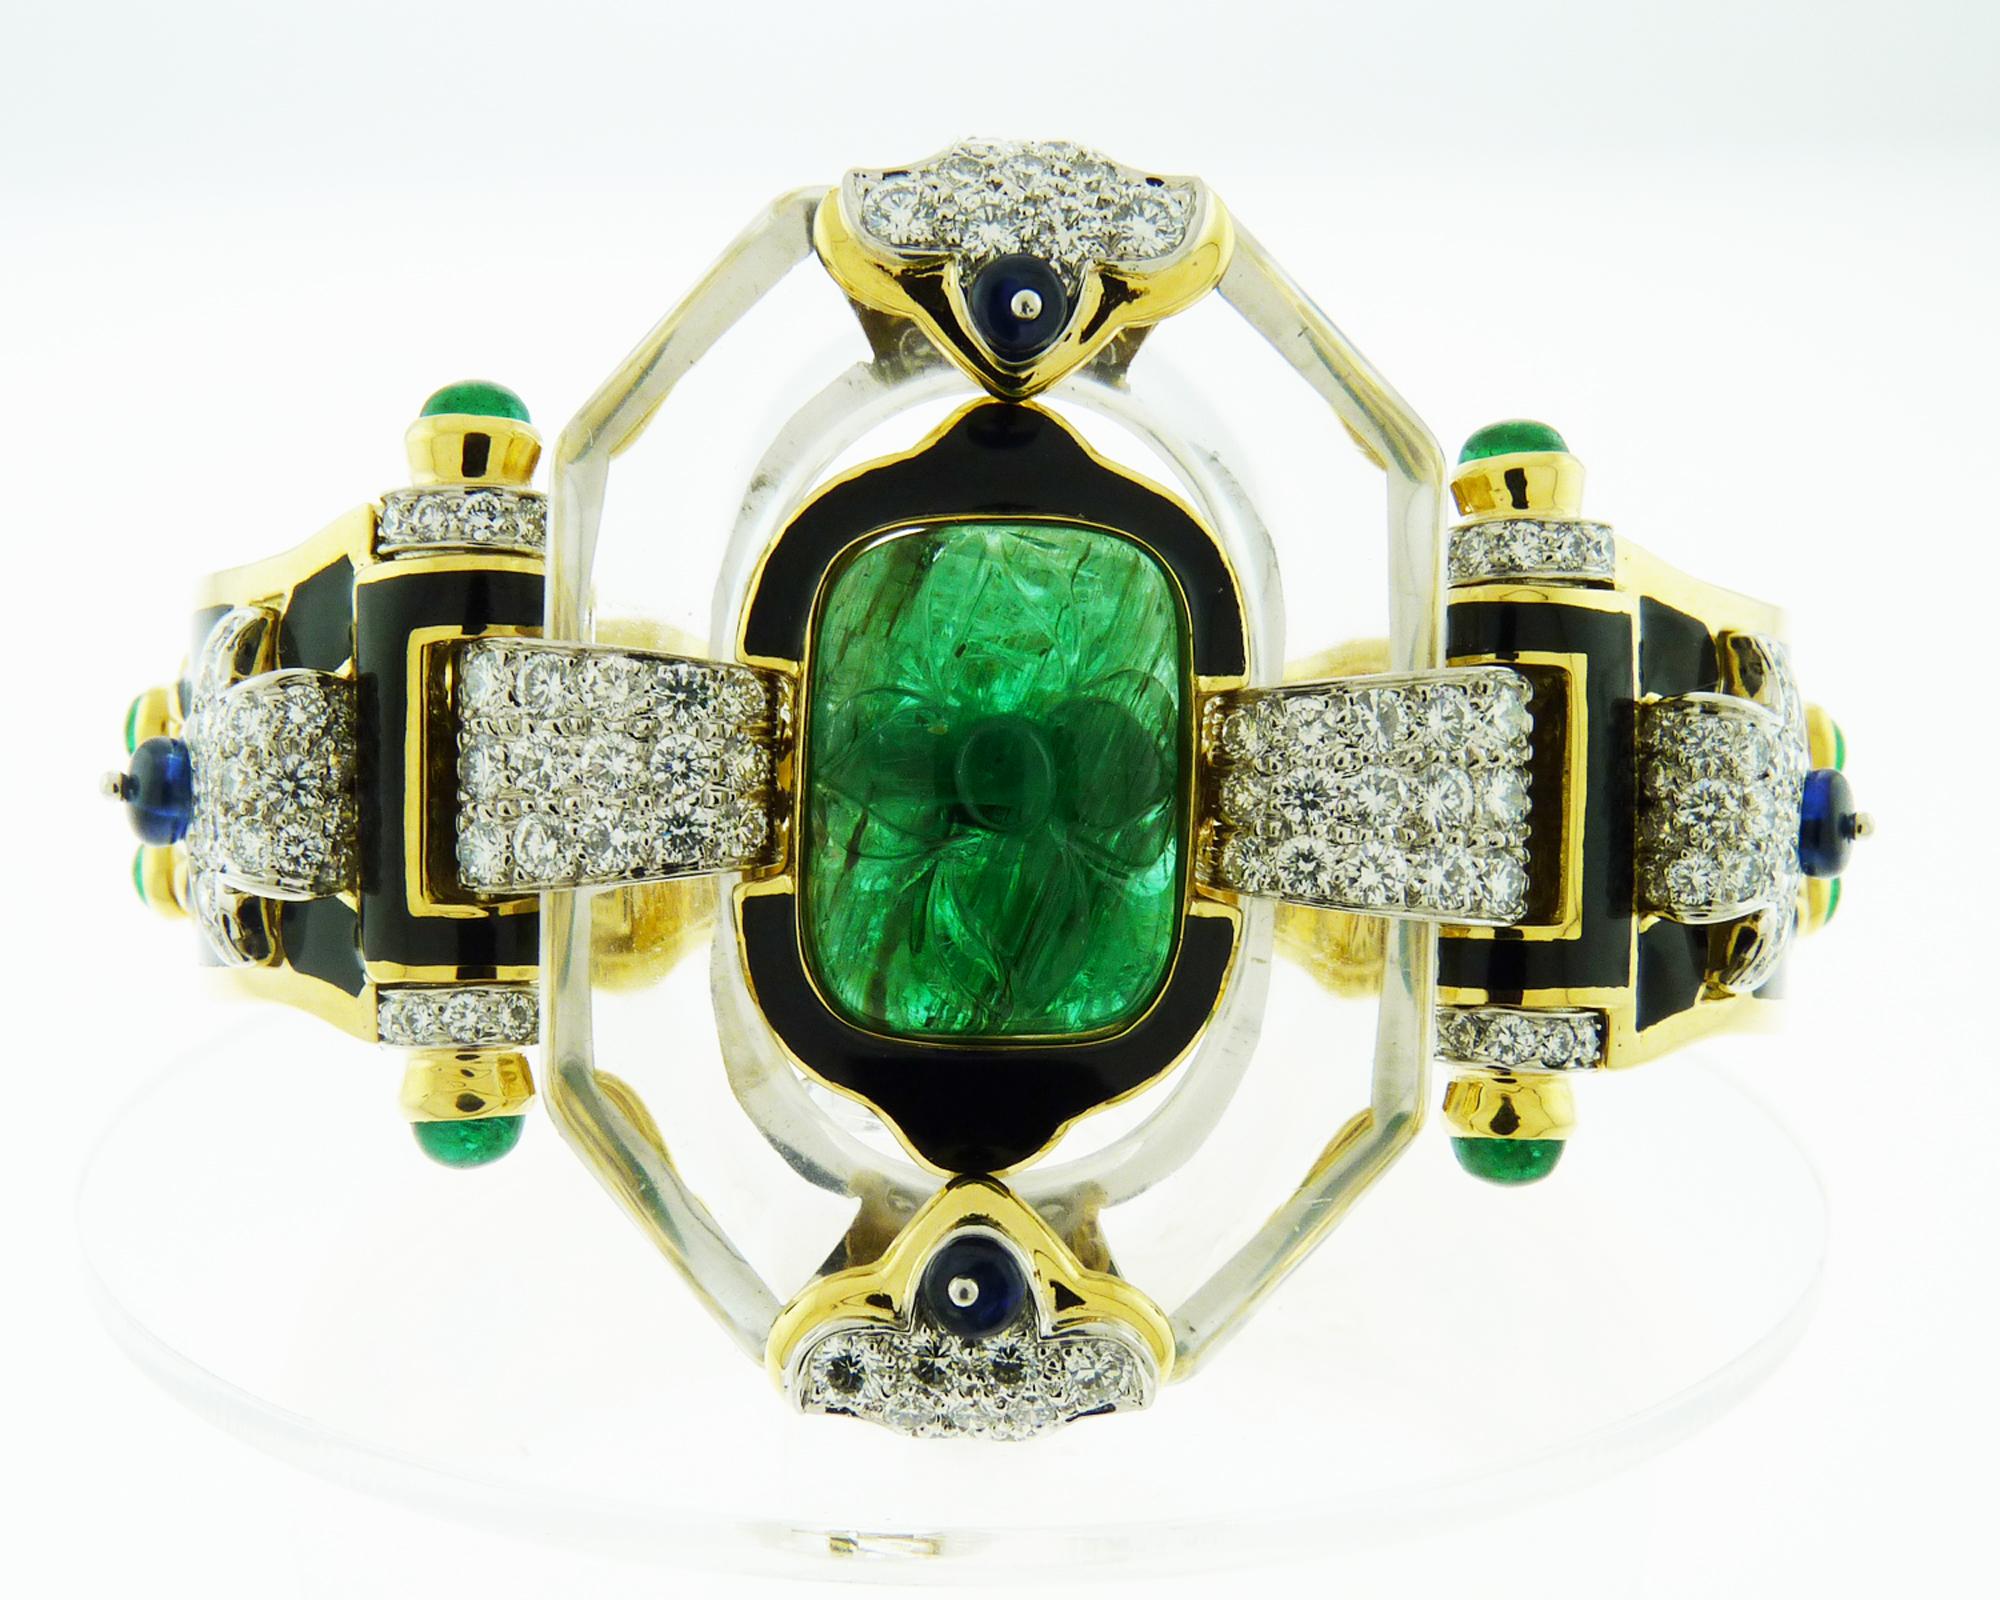 A spectacular Cross River bracelet by David Webb.
Depicting approximately 20.62 carats of carved, cabochon and pear-shaped emeralds, carved rock crystal, 3.18 carats of sapphire beads, 3.44 carats of brilliant-cut diamonds.
It is made with black